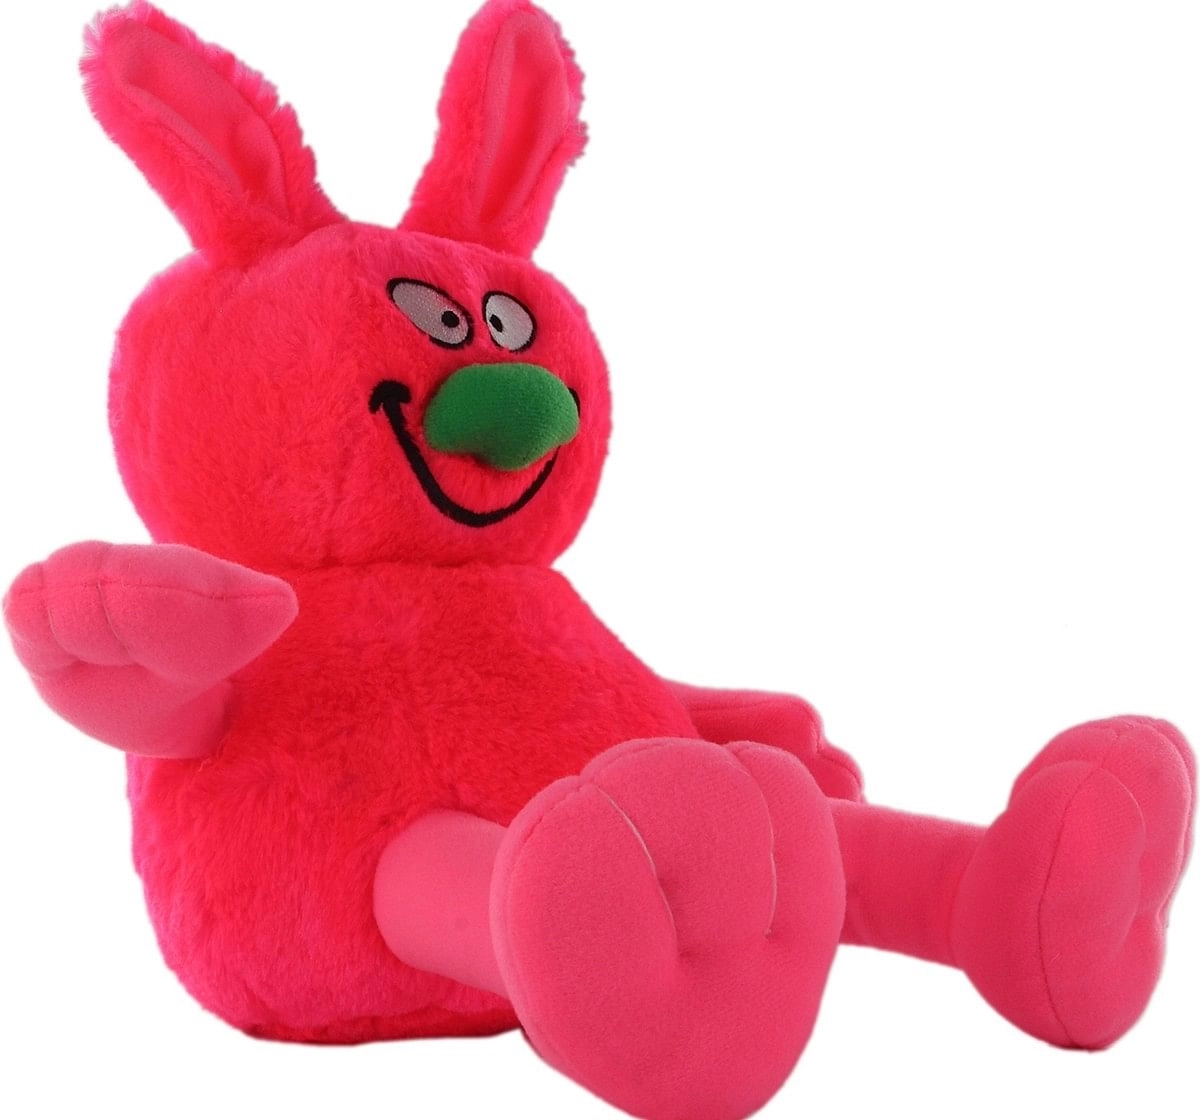 Hamleys Movers & Shakers- Ziggles Pink Interactive Soft Toys for Kids age 3Y+ - 8 Cm (Pink)